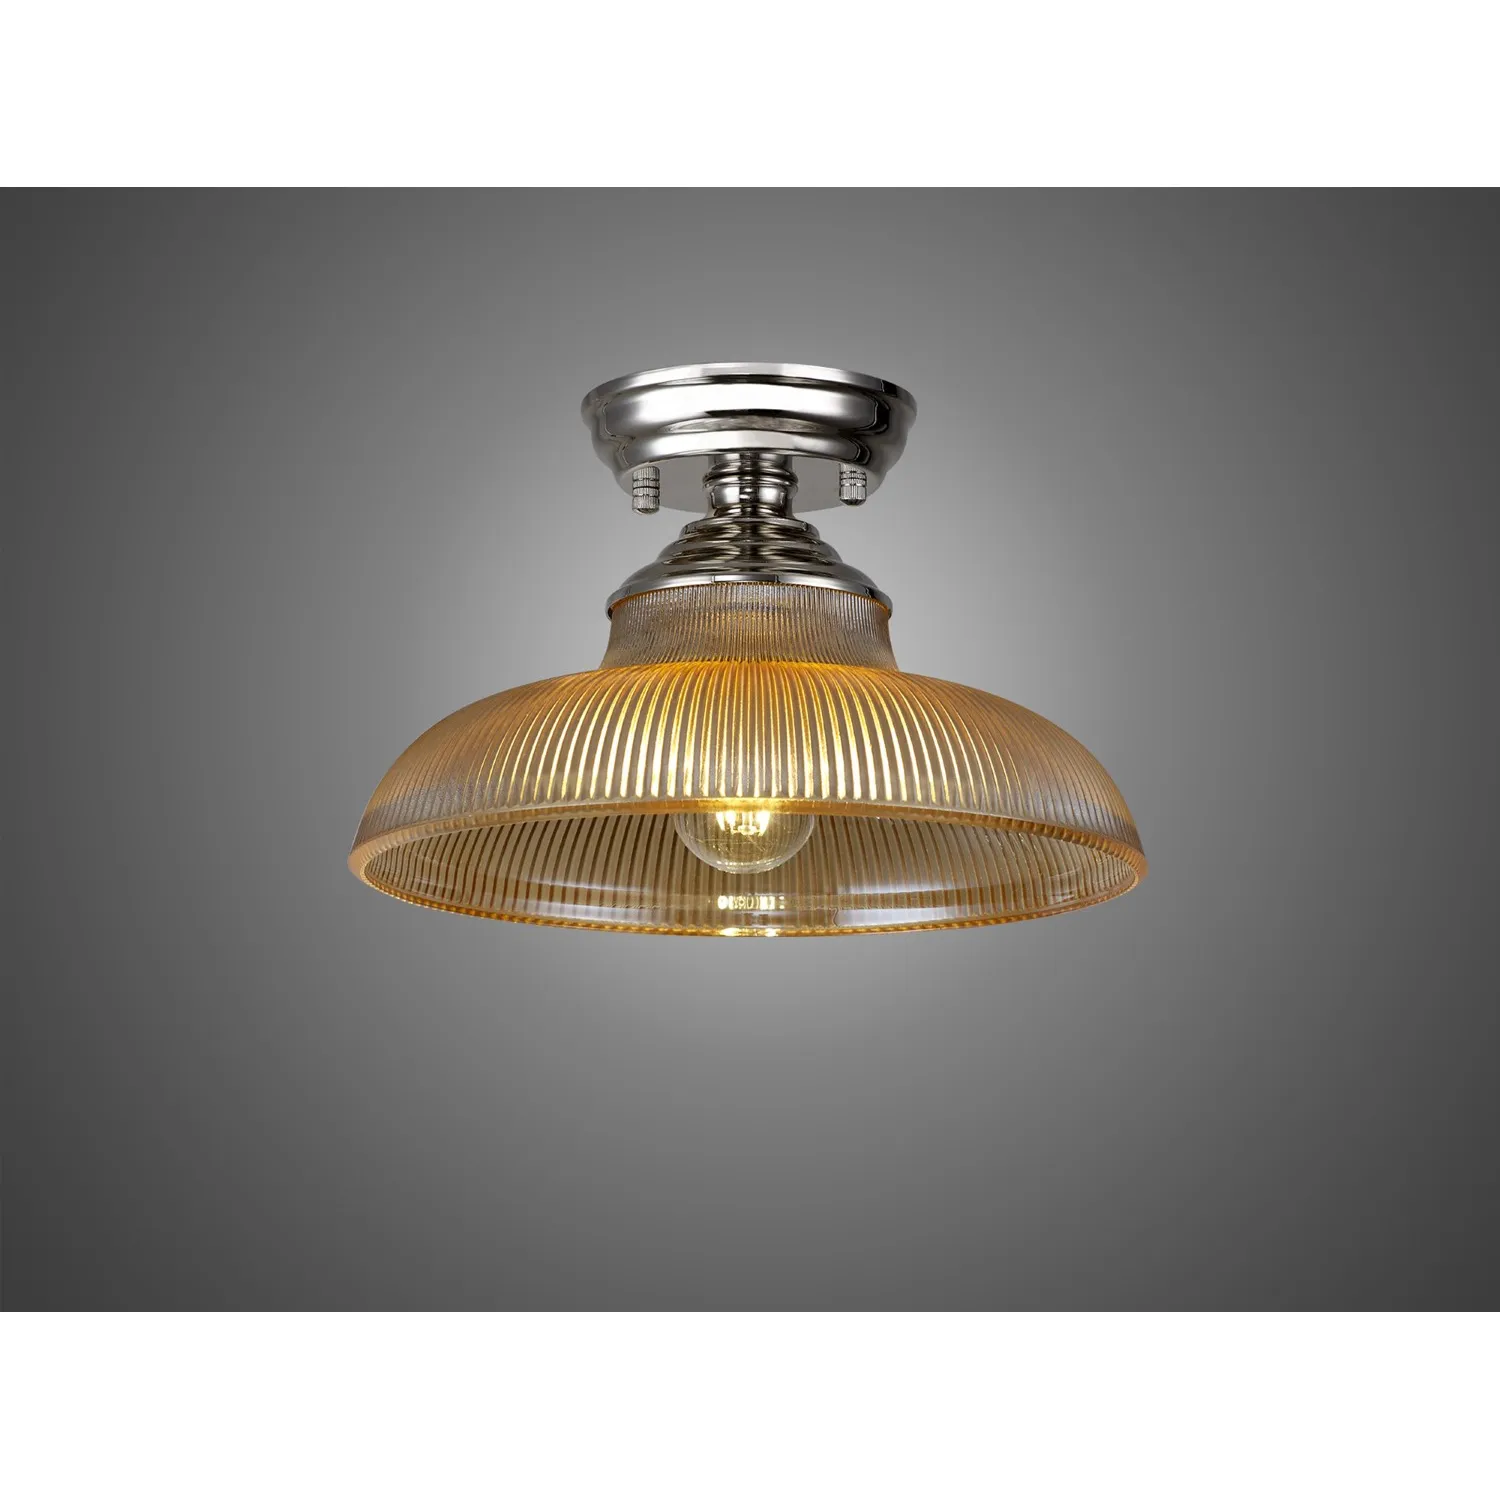 Billericay 1 Light Flush Ceiling E27 With Round 30cm Glass Shade Polished Nickel Amber